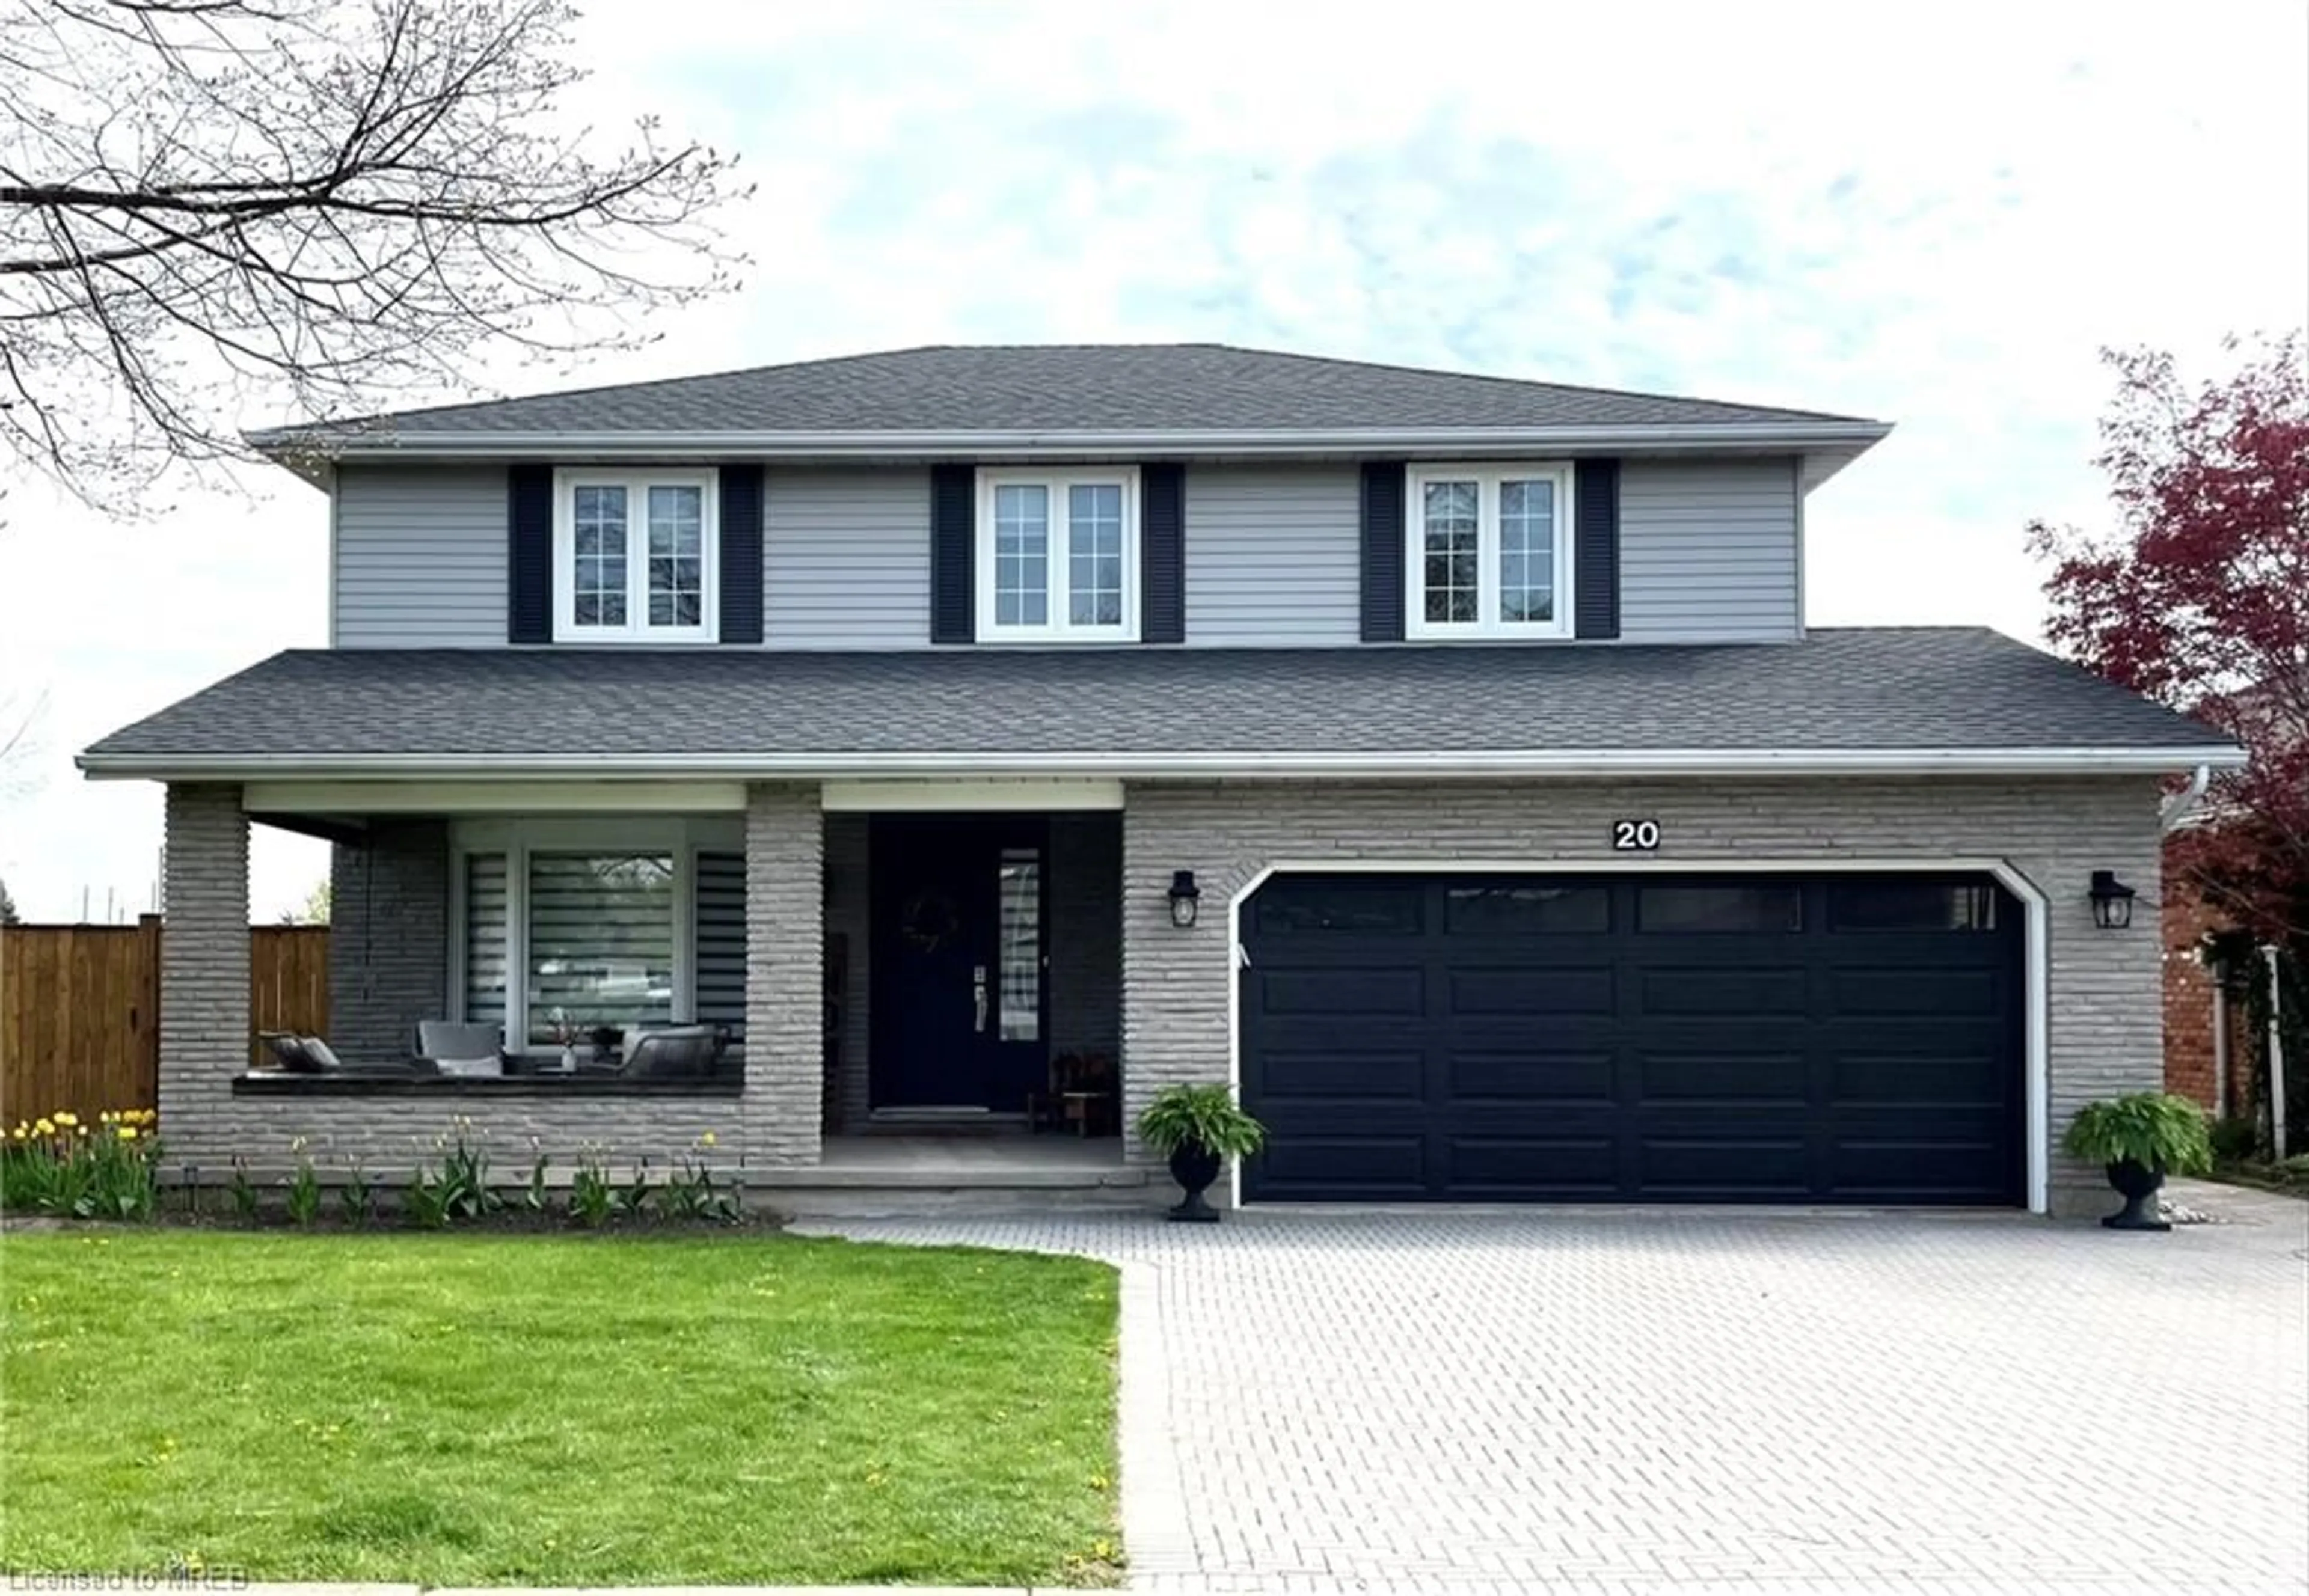 Home with brick exterior material for 20 Stonebridge Gate, St. Catharines Ontario L2S 3N1